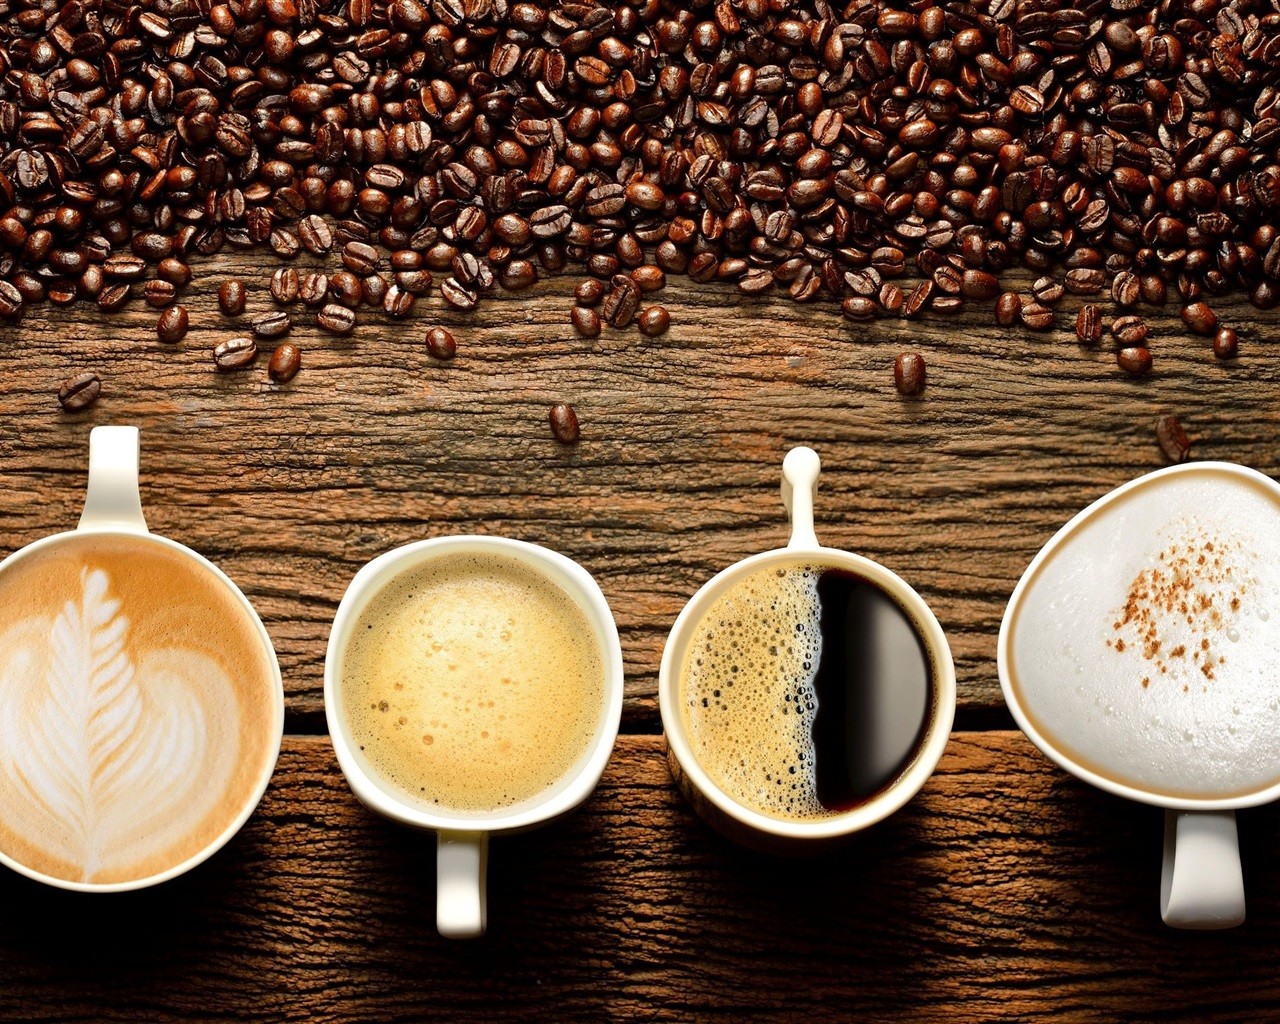 four-cups-drinks-coffee-beans-cappuccino-1280x1024-1622274165.jpg